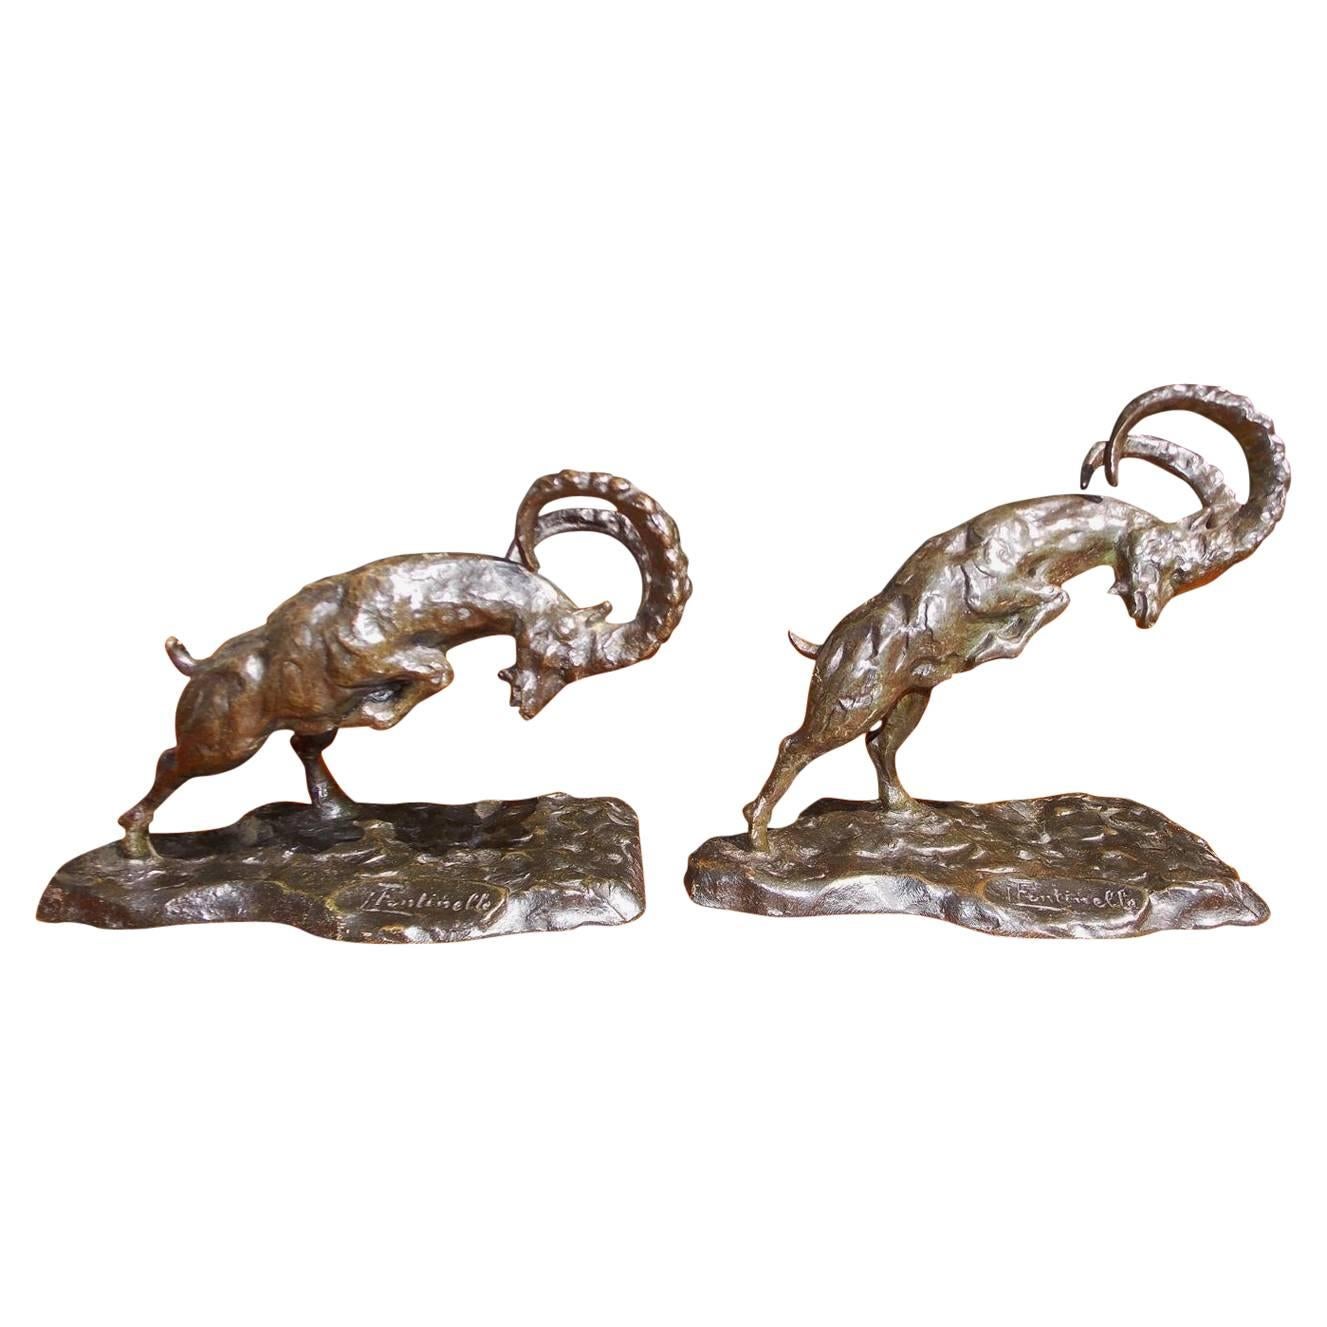 Pair of French Bronze Figural Ram Bookends, Signed L. Fontinelle, Circa 1900